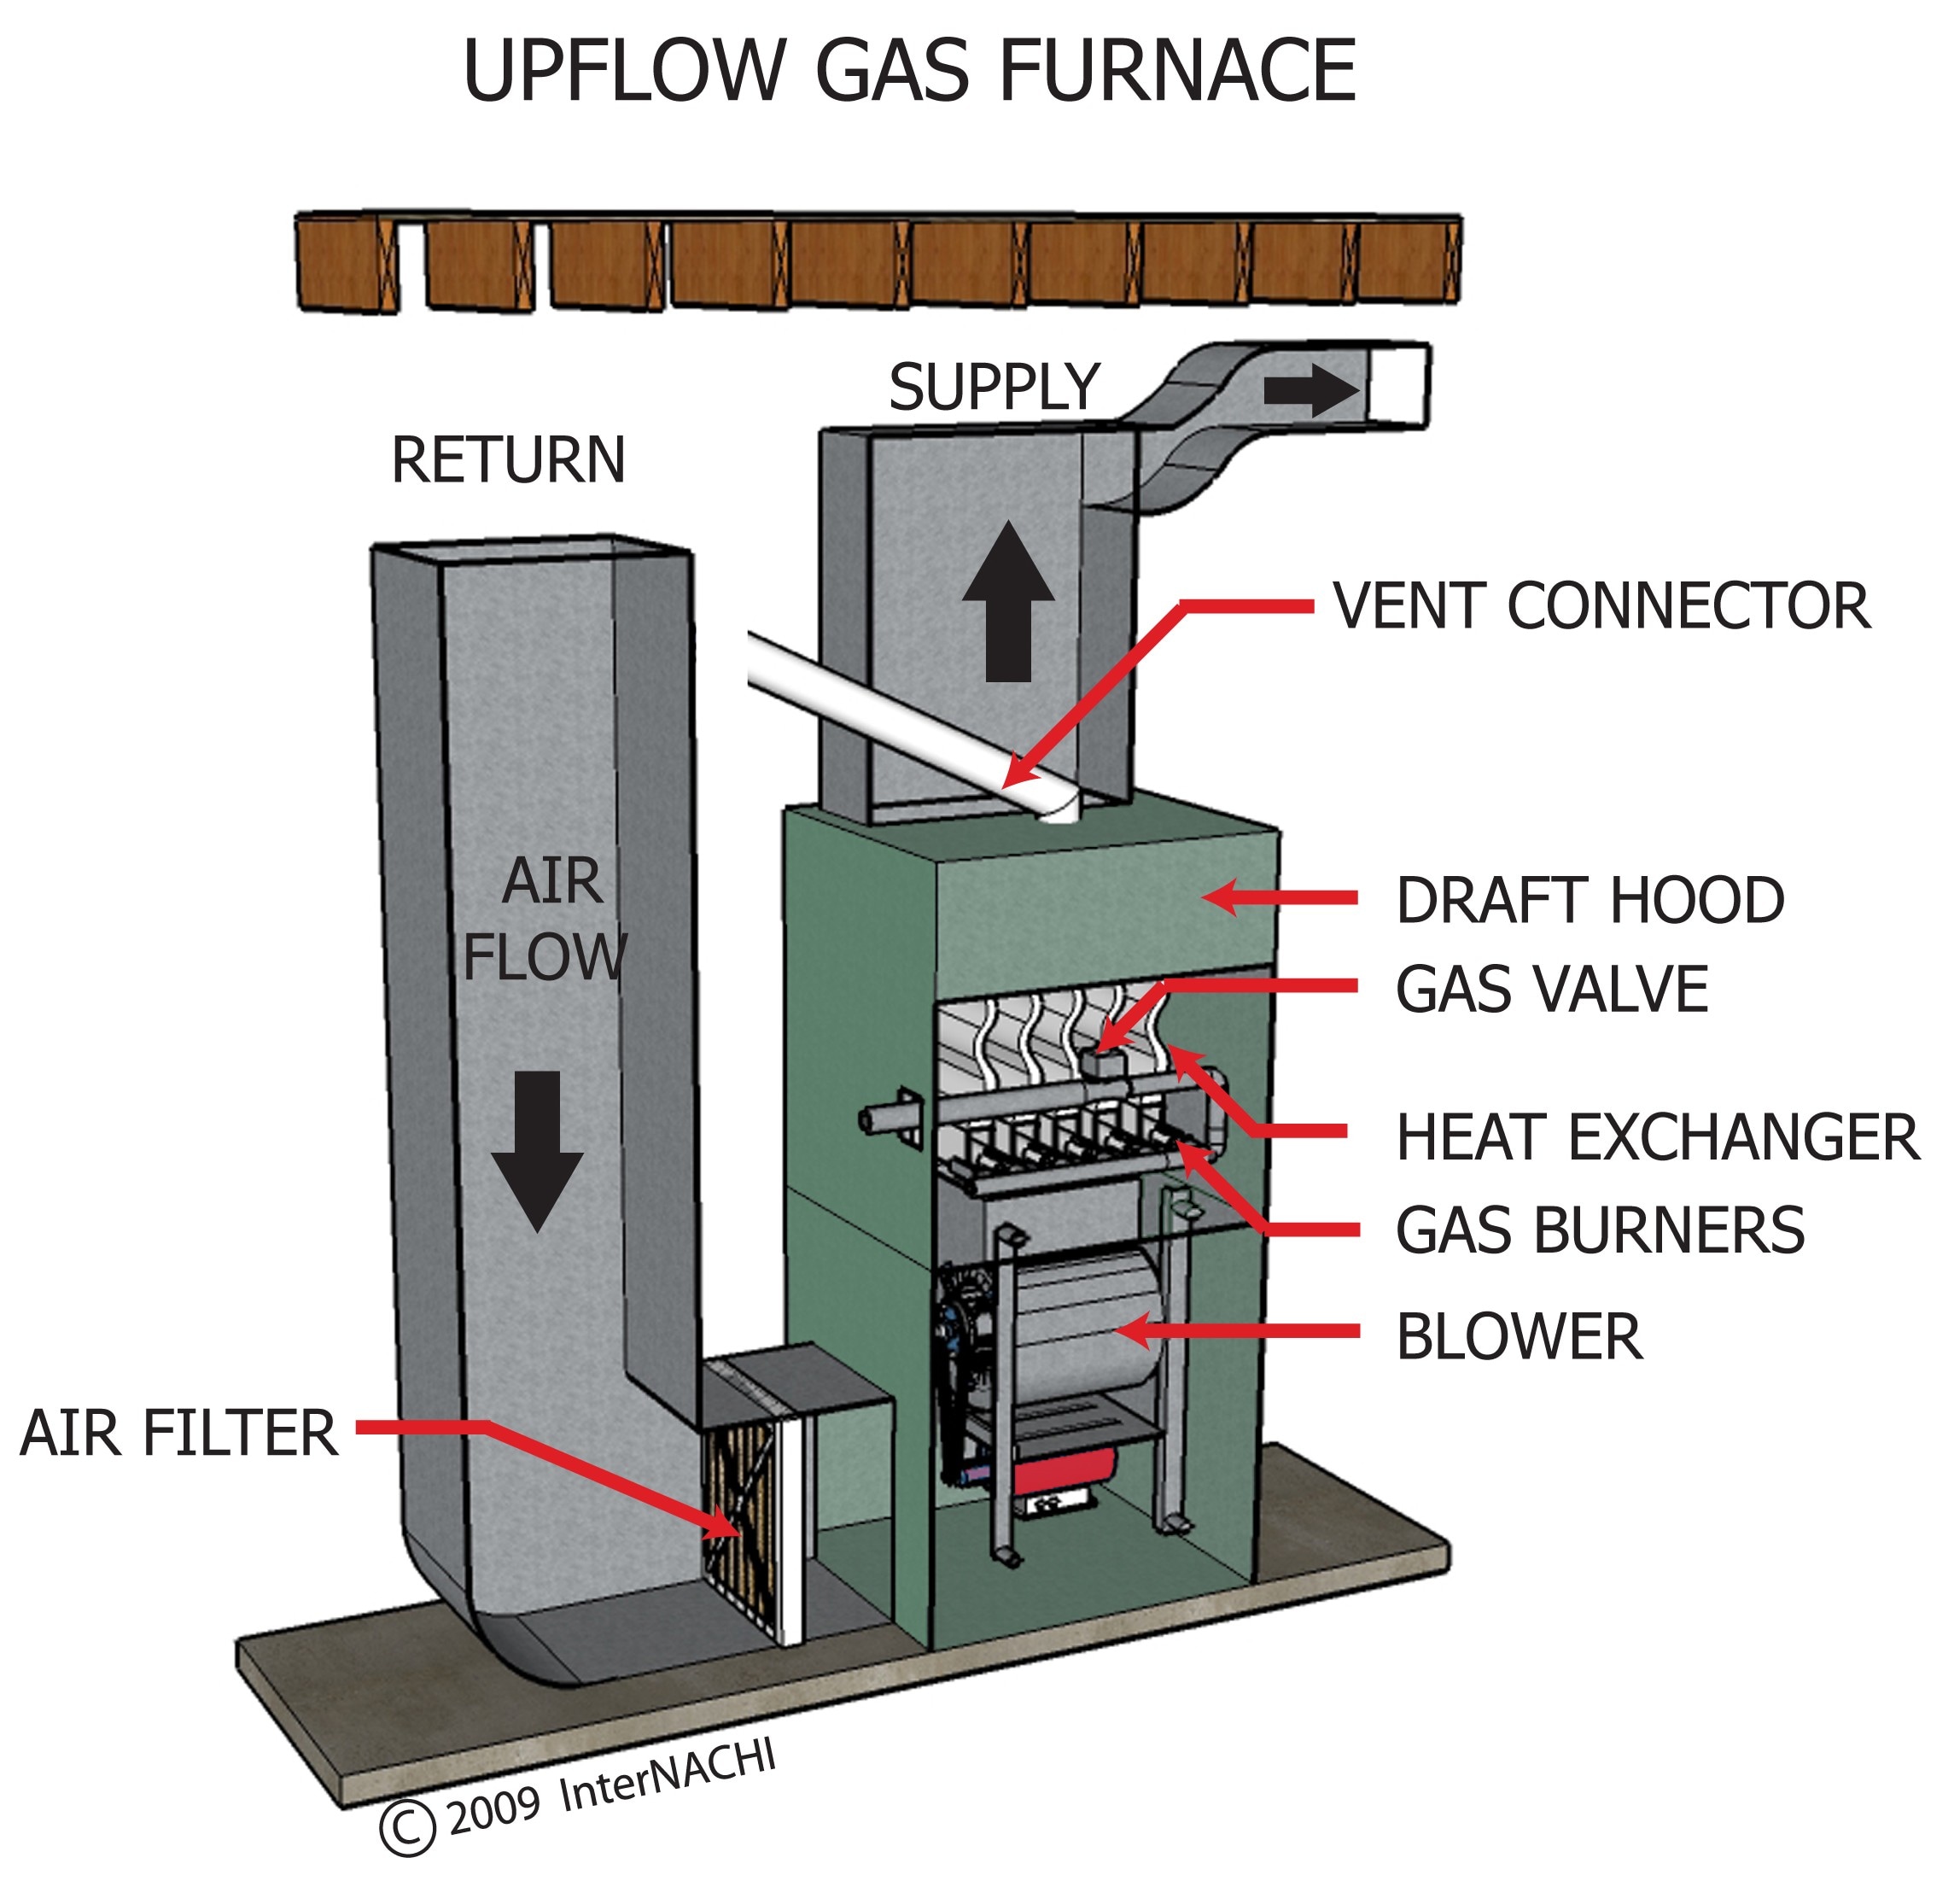 most-efficient-natural-gas-furnaces-buying-recommendations